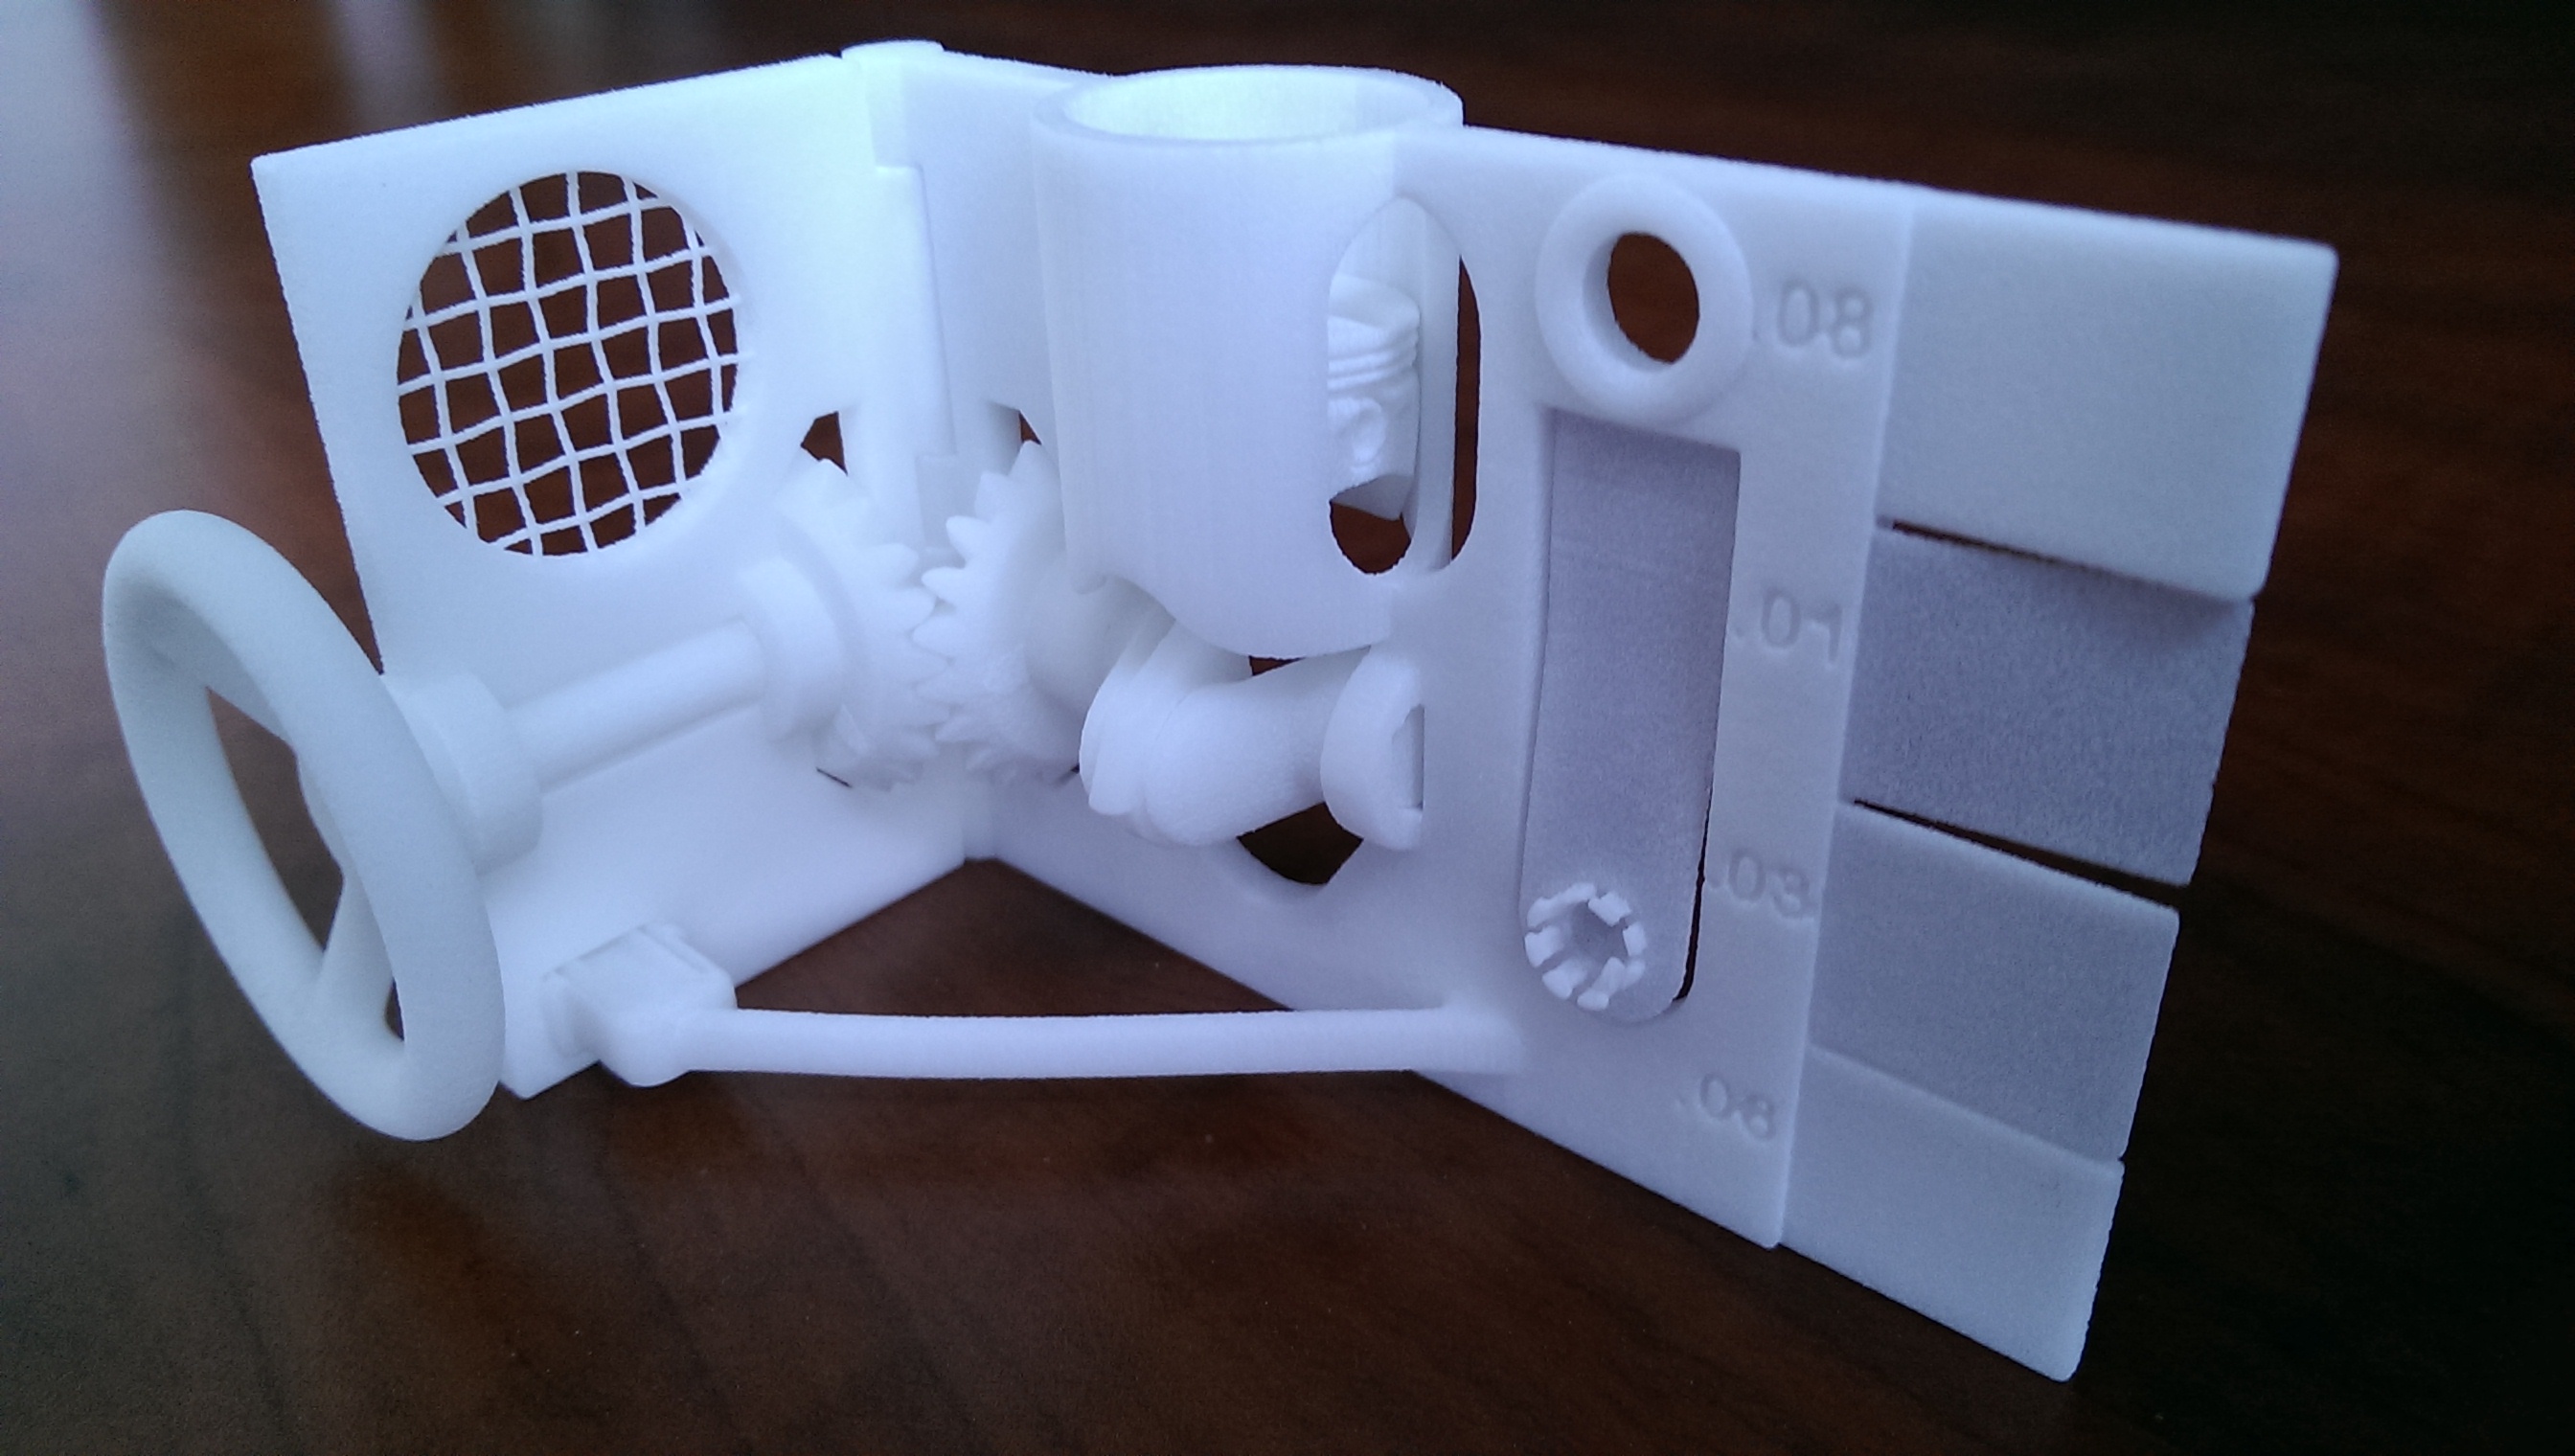 3D Printing assembly required! - Ultimate 3D